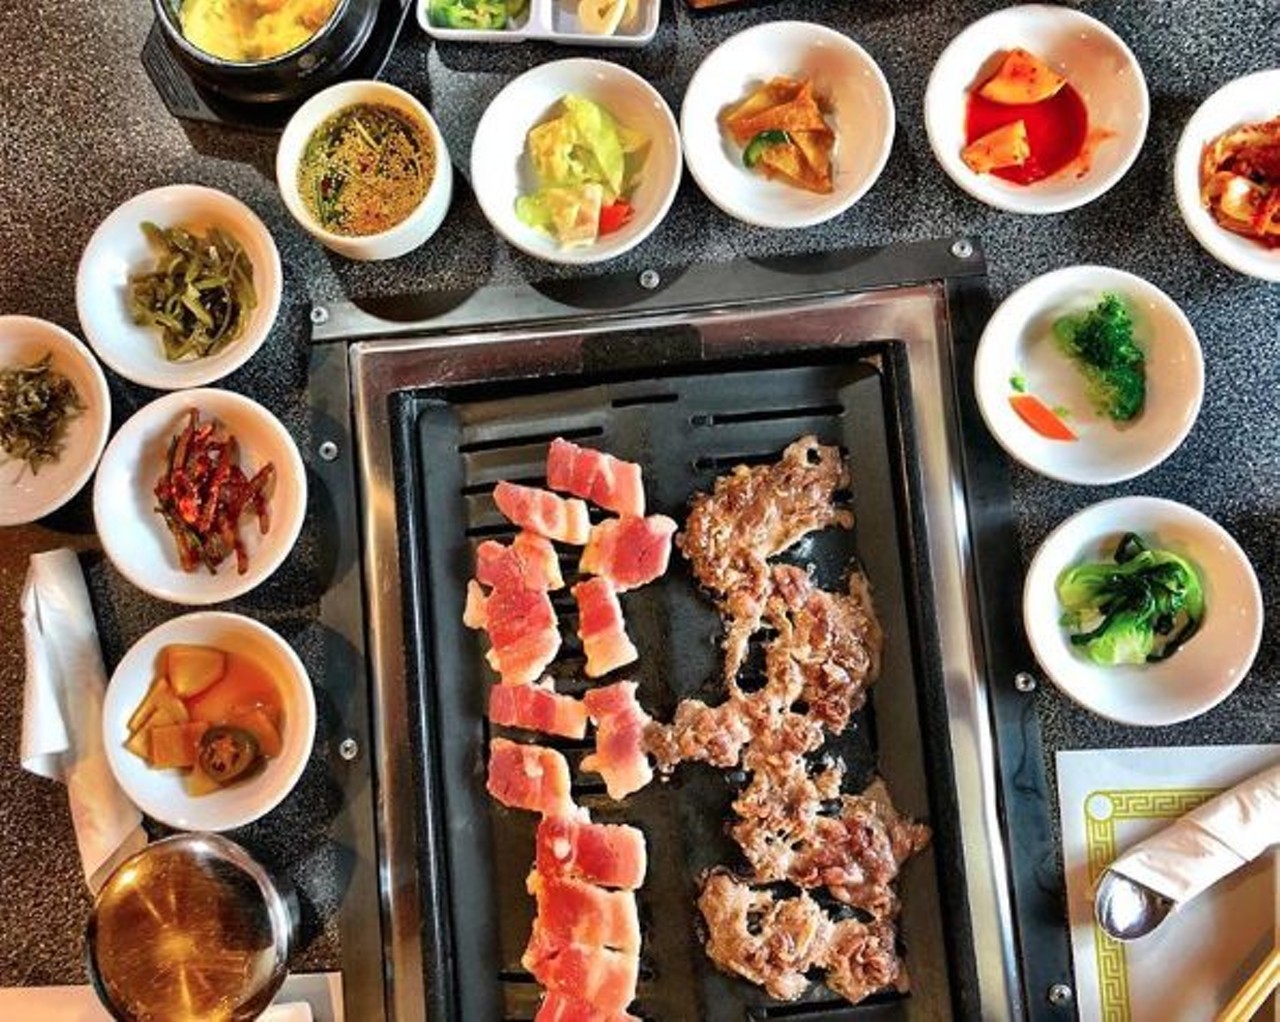  Rising Grill
3709 Payne Ave. | (216) 465-3561
In the place of former restaurant Seoul Hot Pot, this Korean barbeque restaurant treats its guests to modern takes on traditional Korean cooking with communal grill tables. 
Photo via clefoodies/Instagram